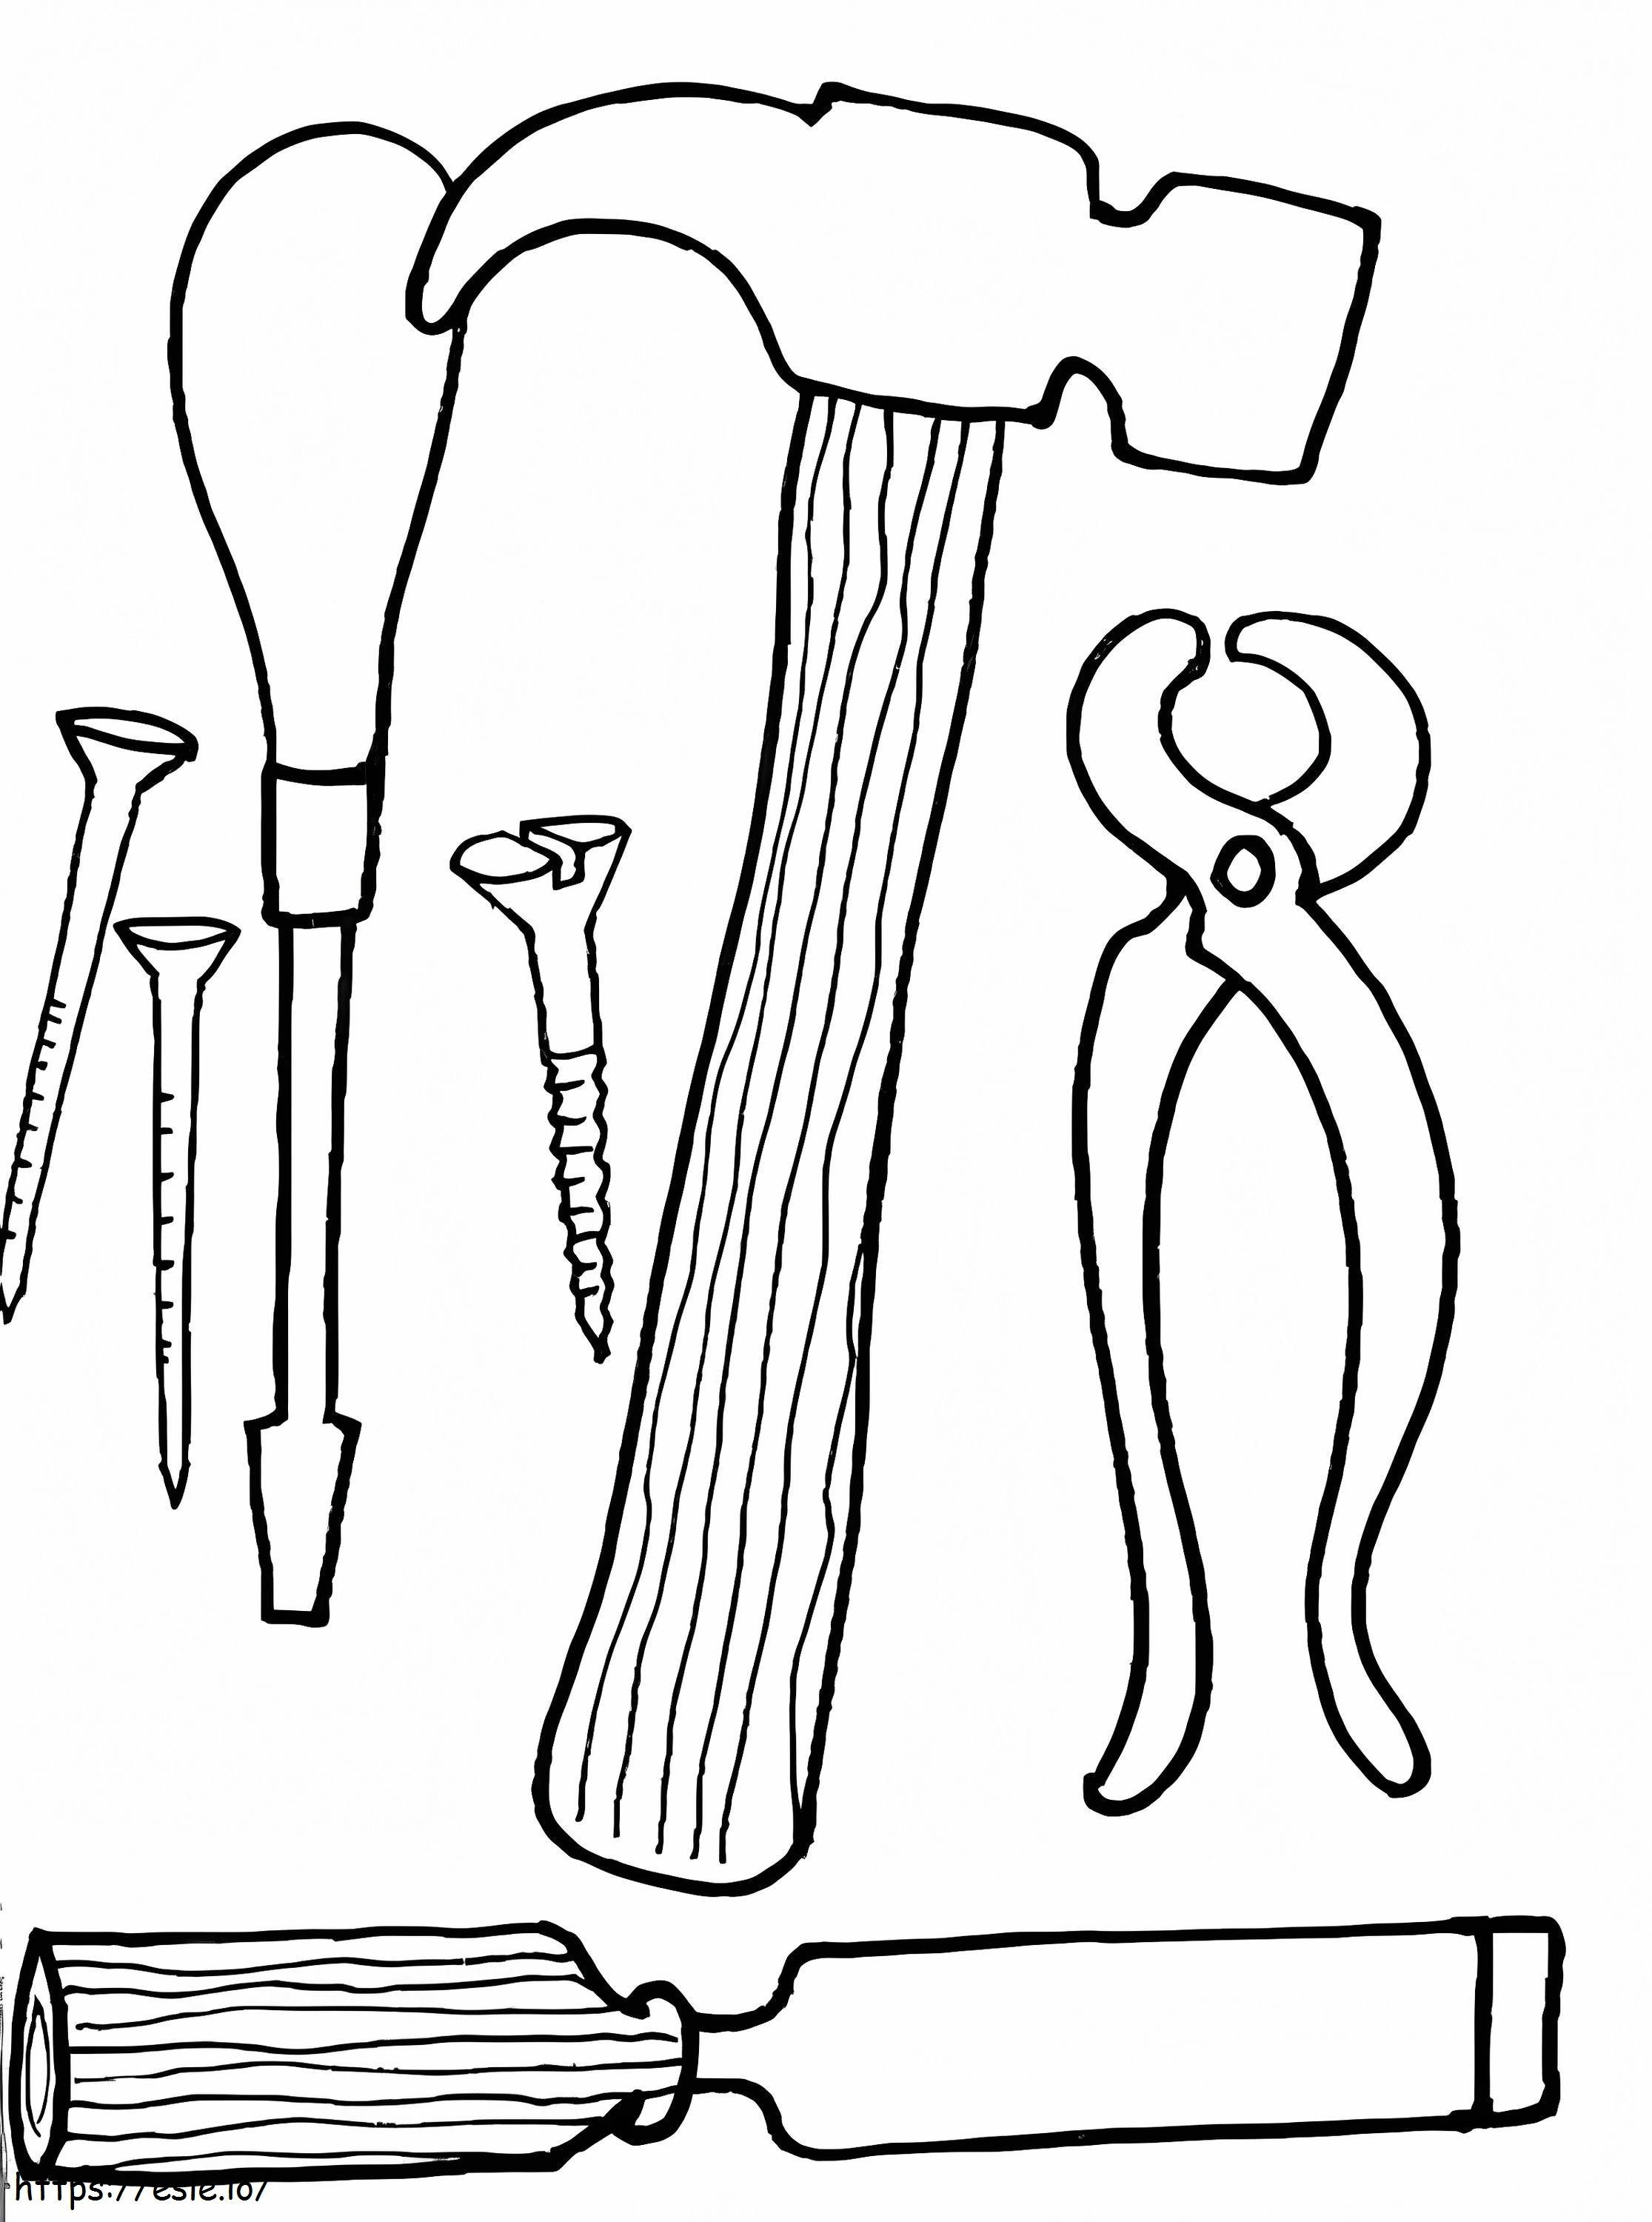 Carpentry Tools coloring page